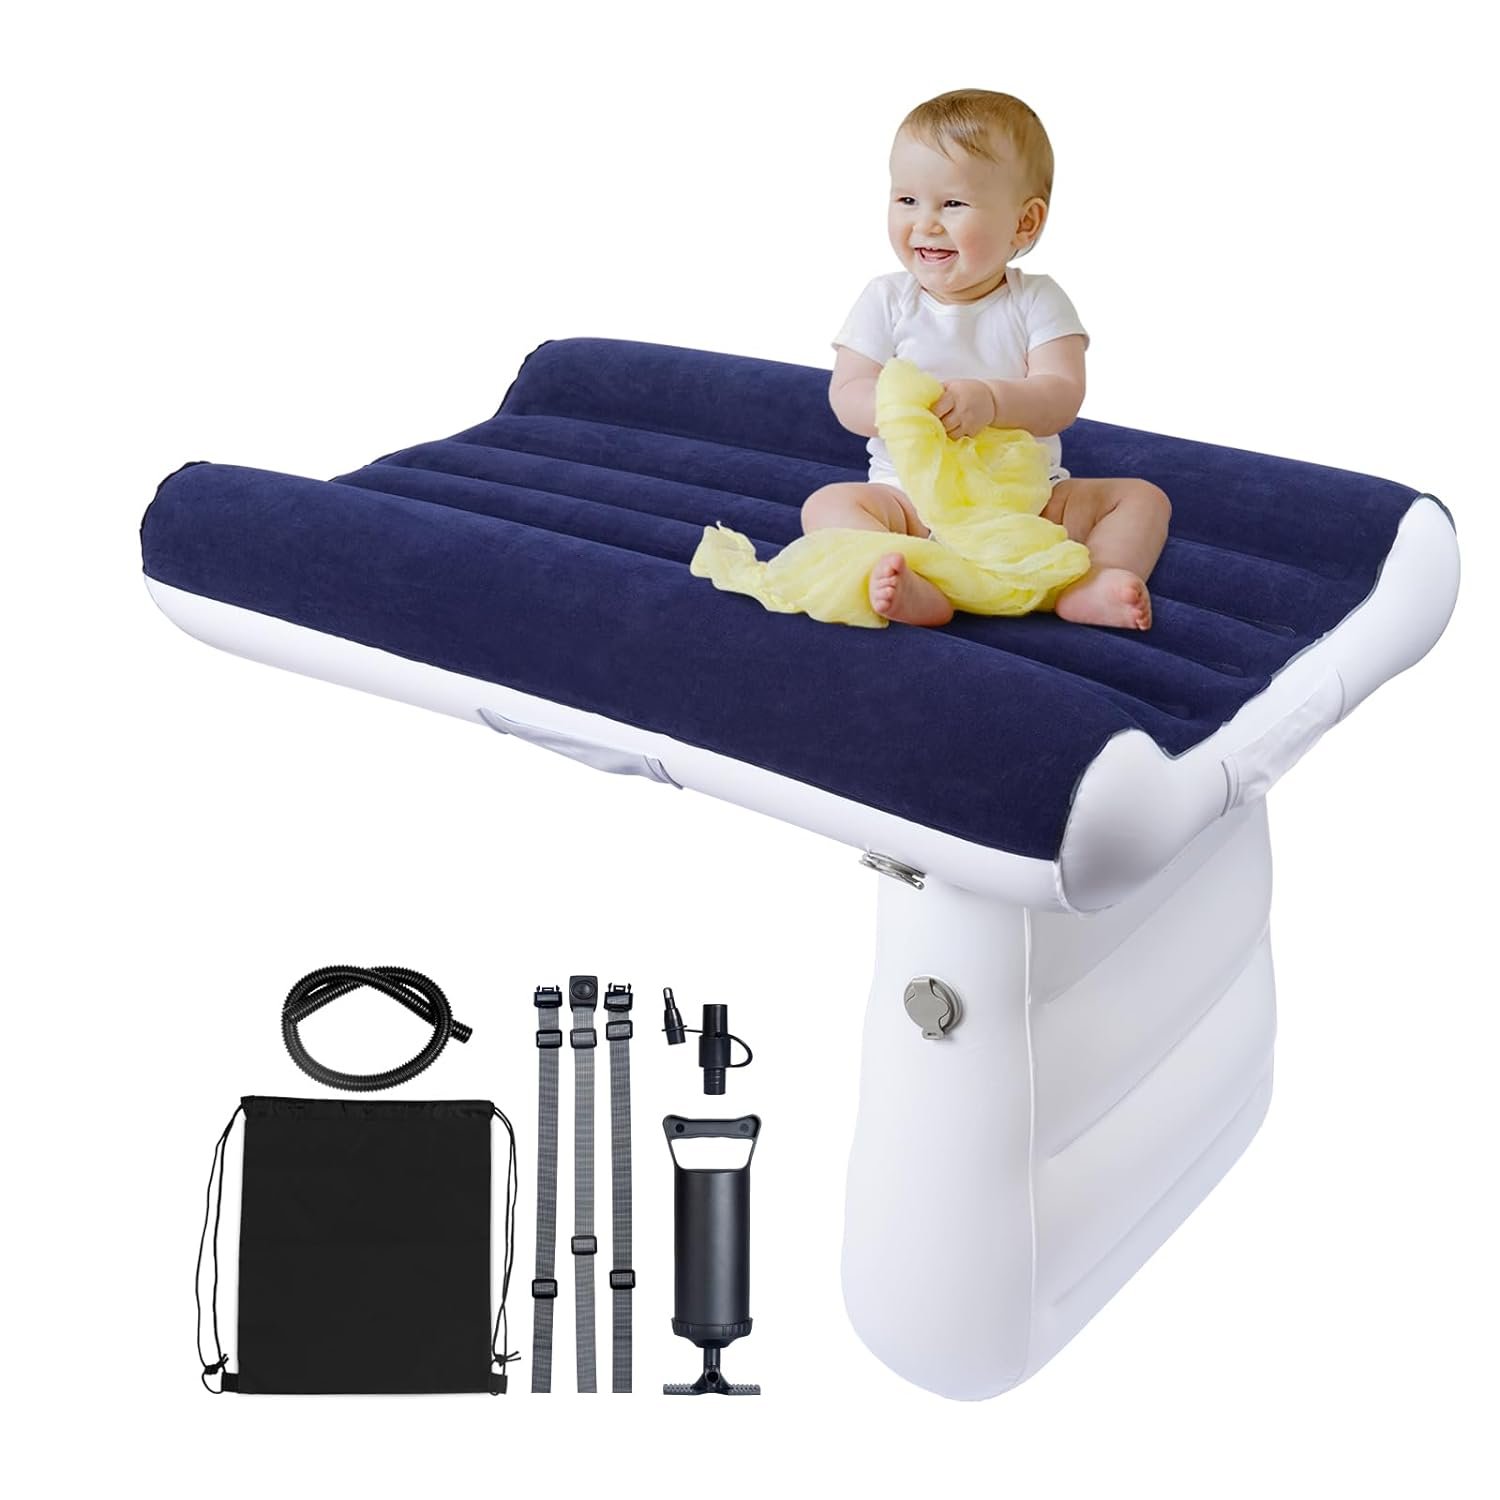 Inflatable Toddler Travel Bed Review